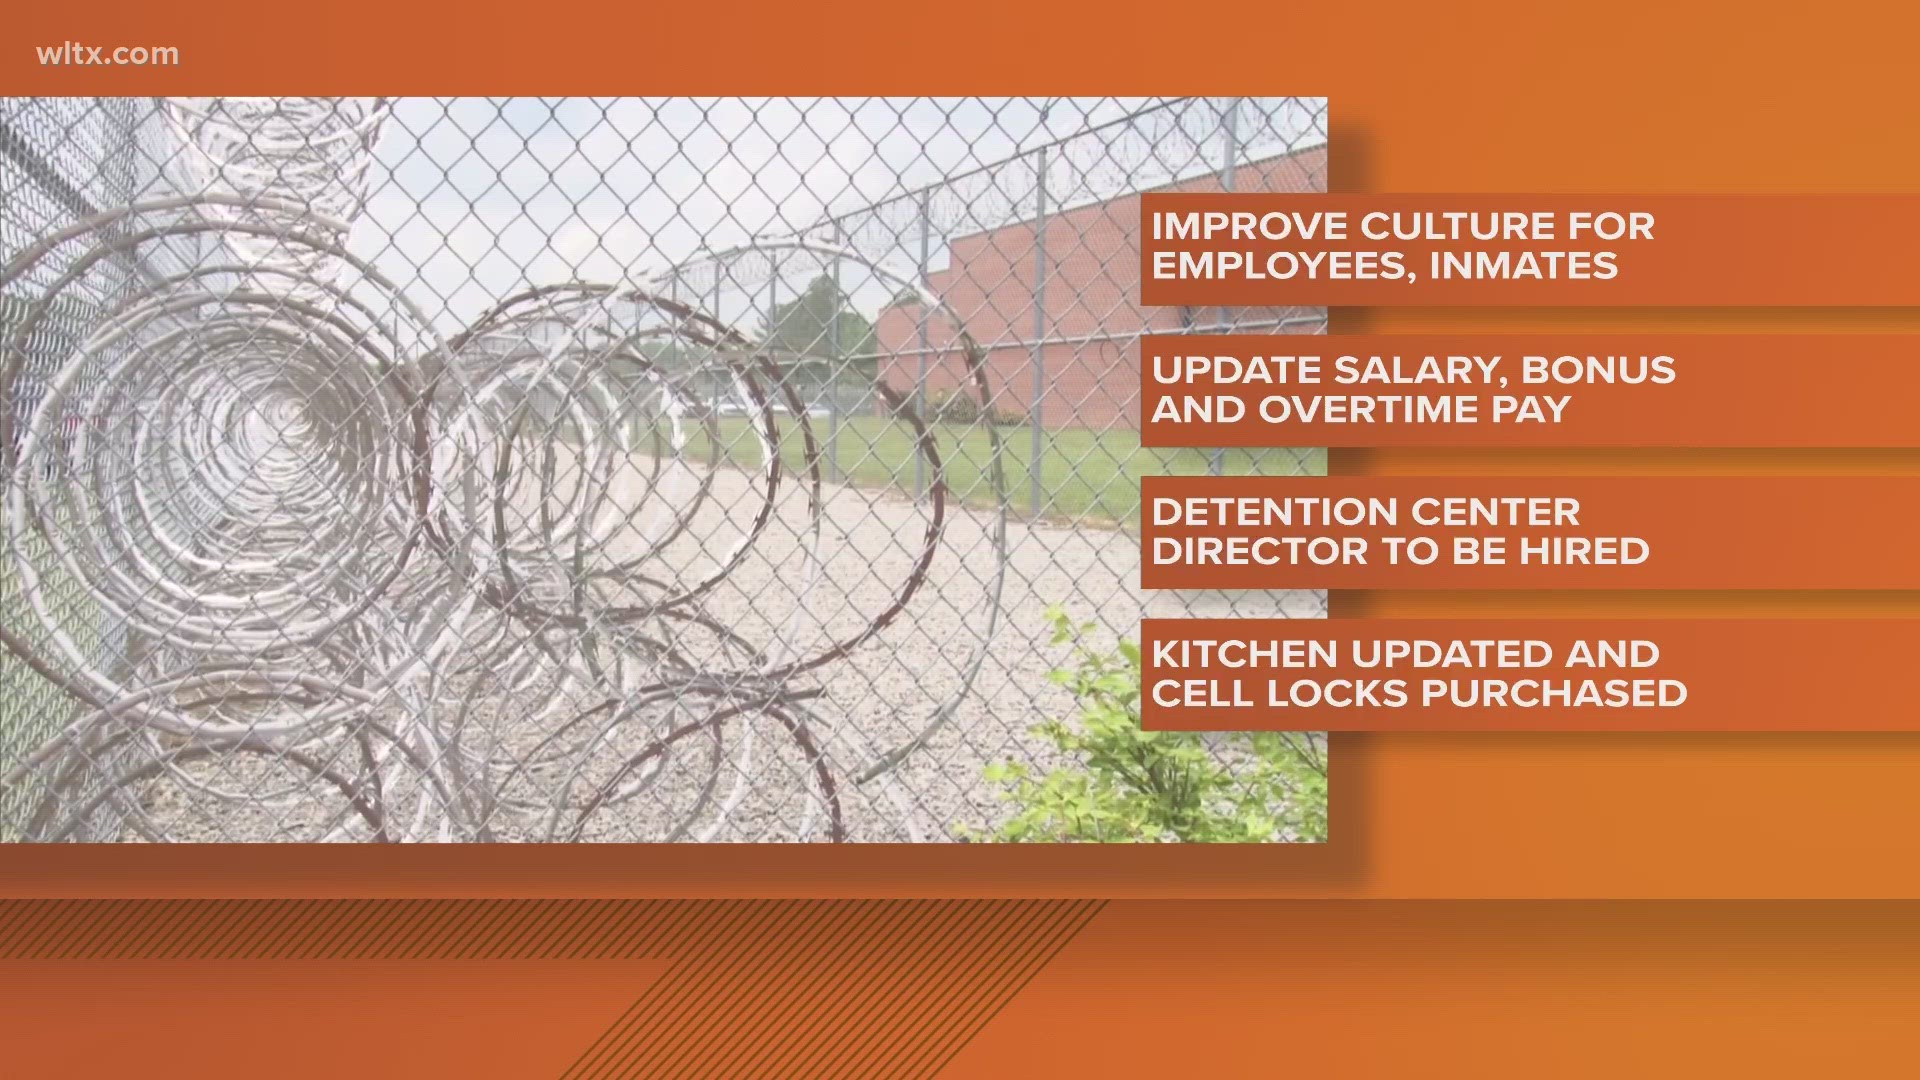 Richland County is laying out the steps they're taking to try and make improvements to the Richland County Detention Center.